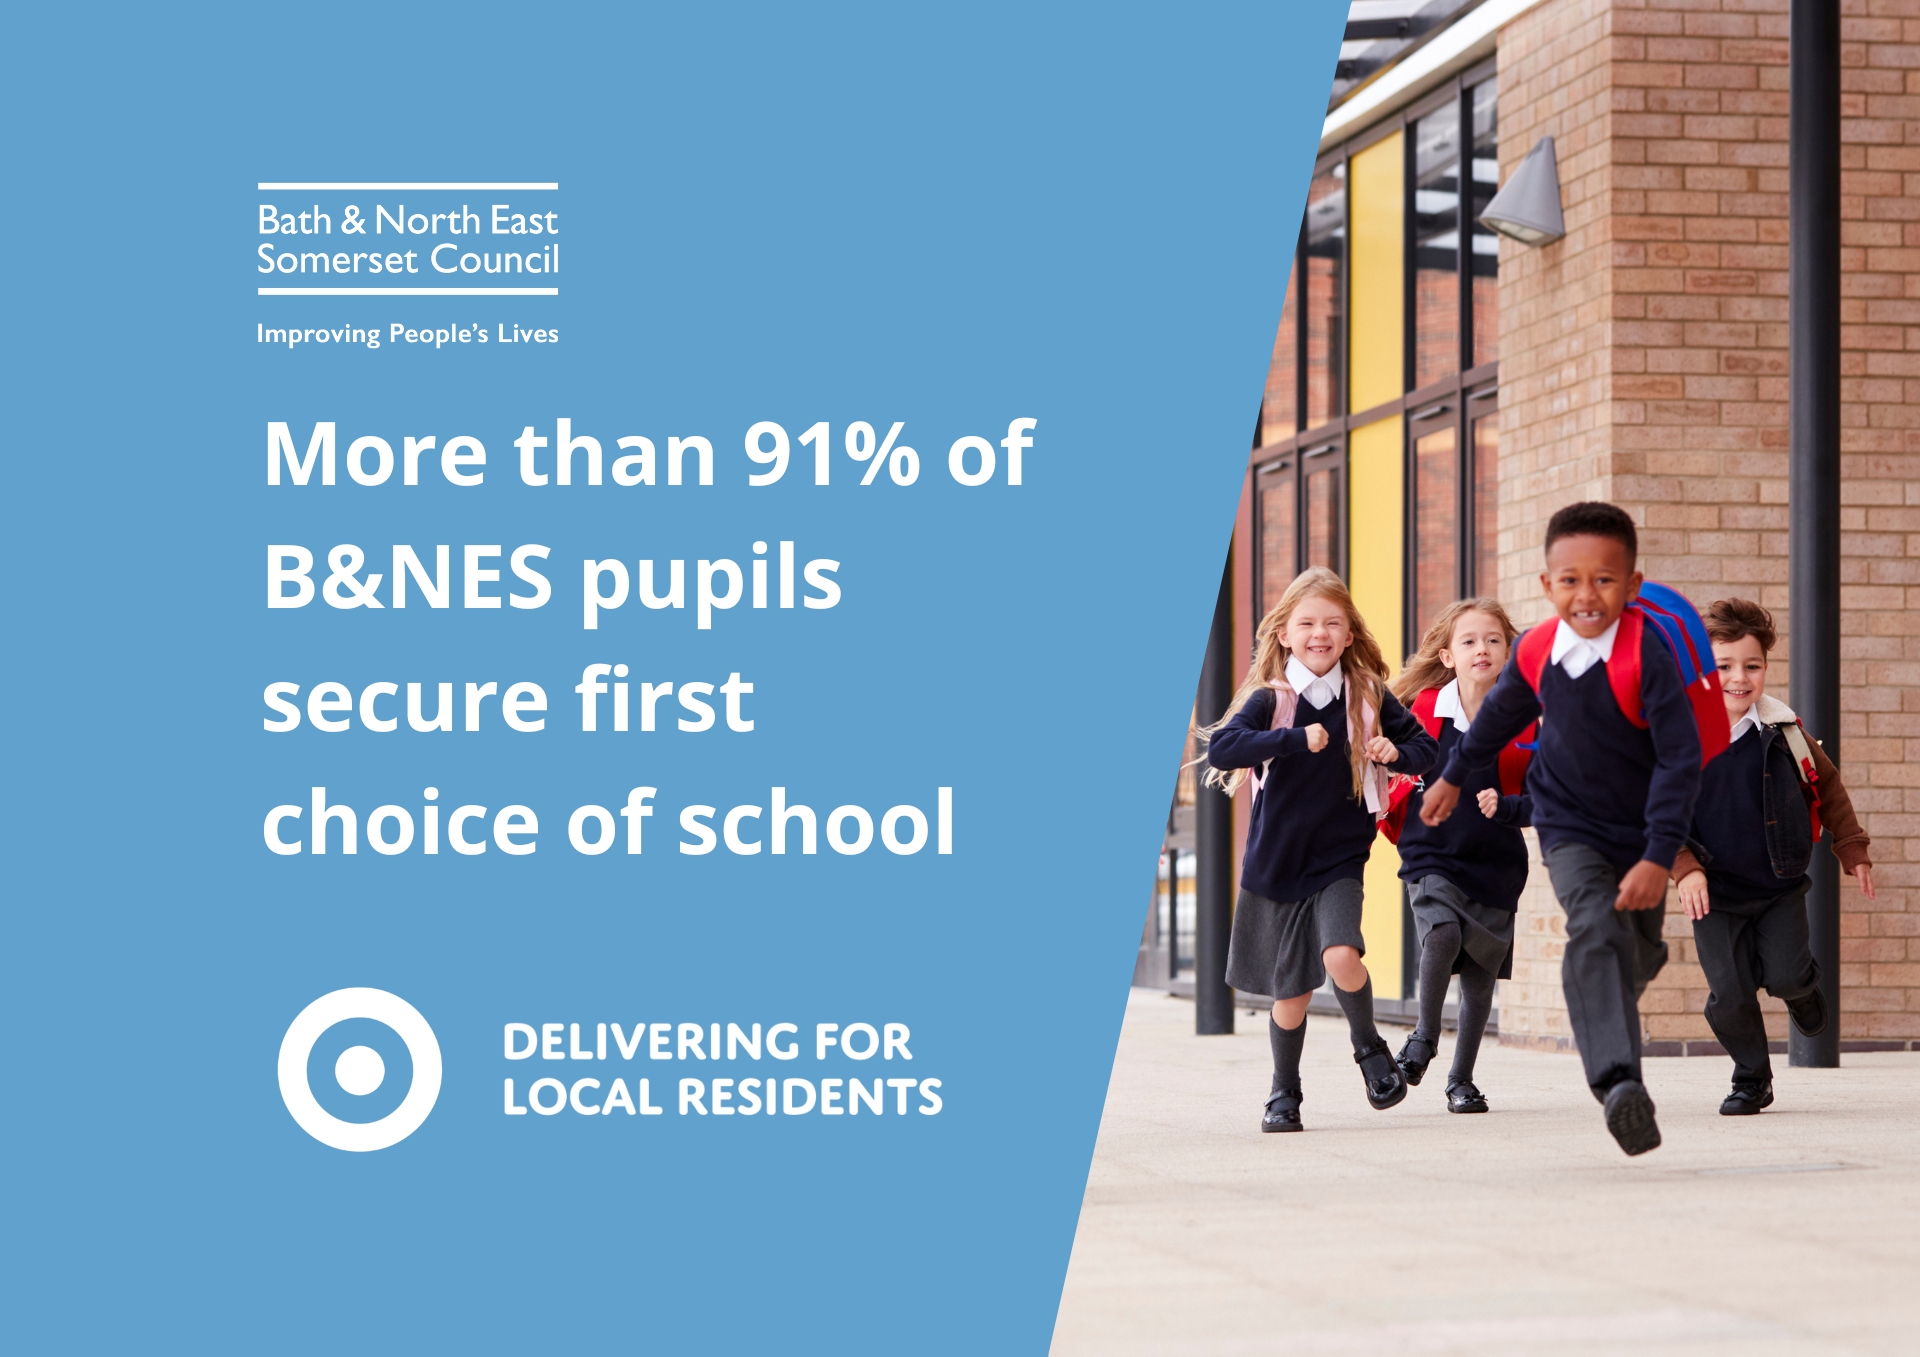 School offer day – majority get first preference in B&NES